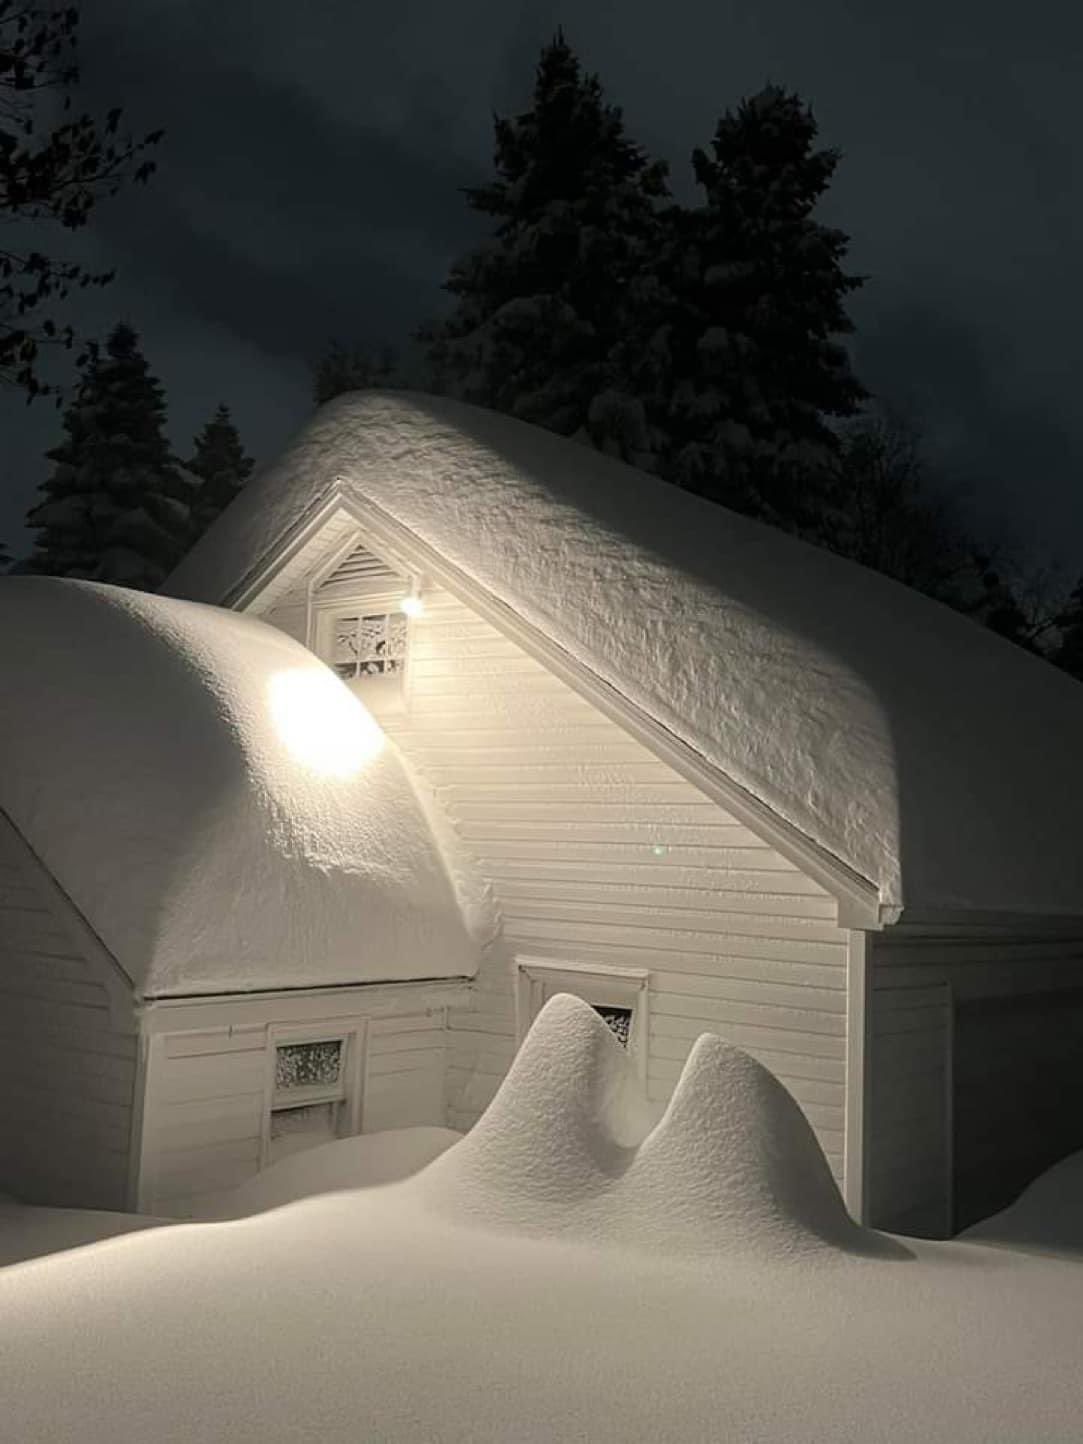 cottage almost buried in fluffy white snow near Buffalo, NY.